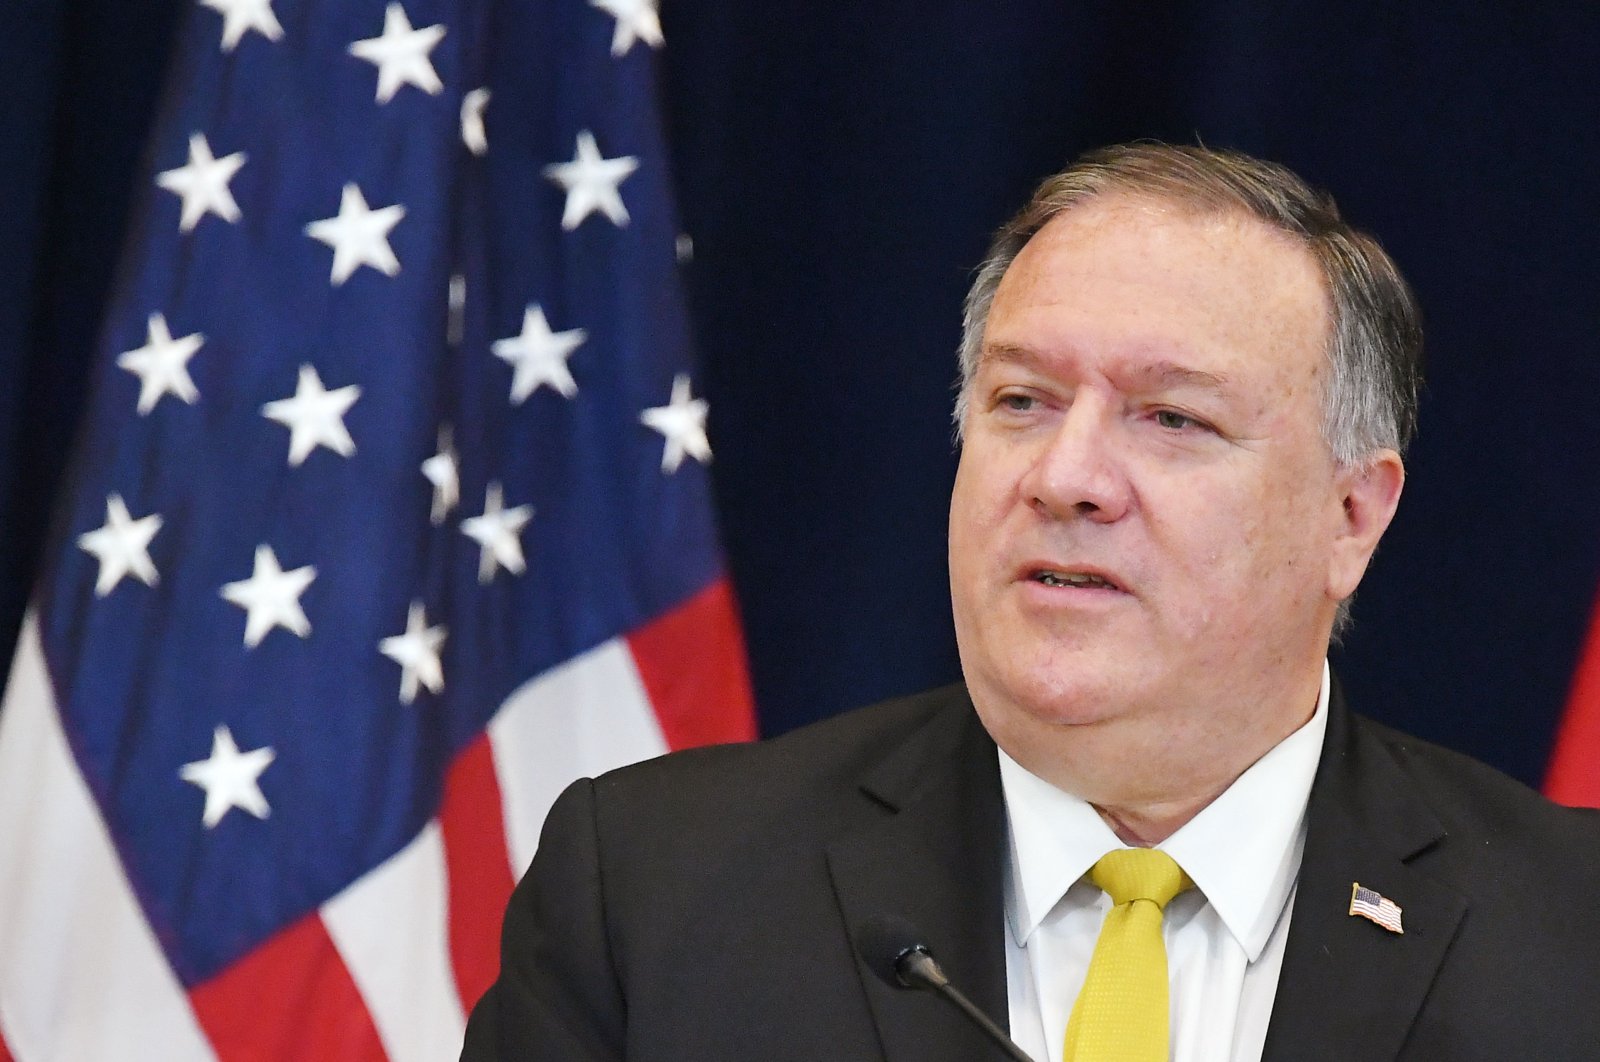 U.S. Secretary of State Michael Pompeo speaks during a press conference with Iraq's Foreign Minister Fuad Hussein at the State Department in Washington, DC, August 19, 2020. (AFP Photo)